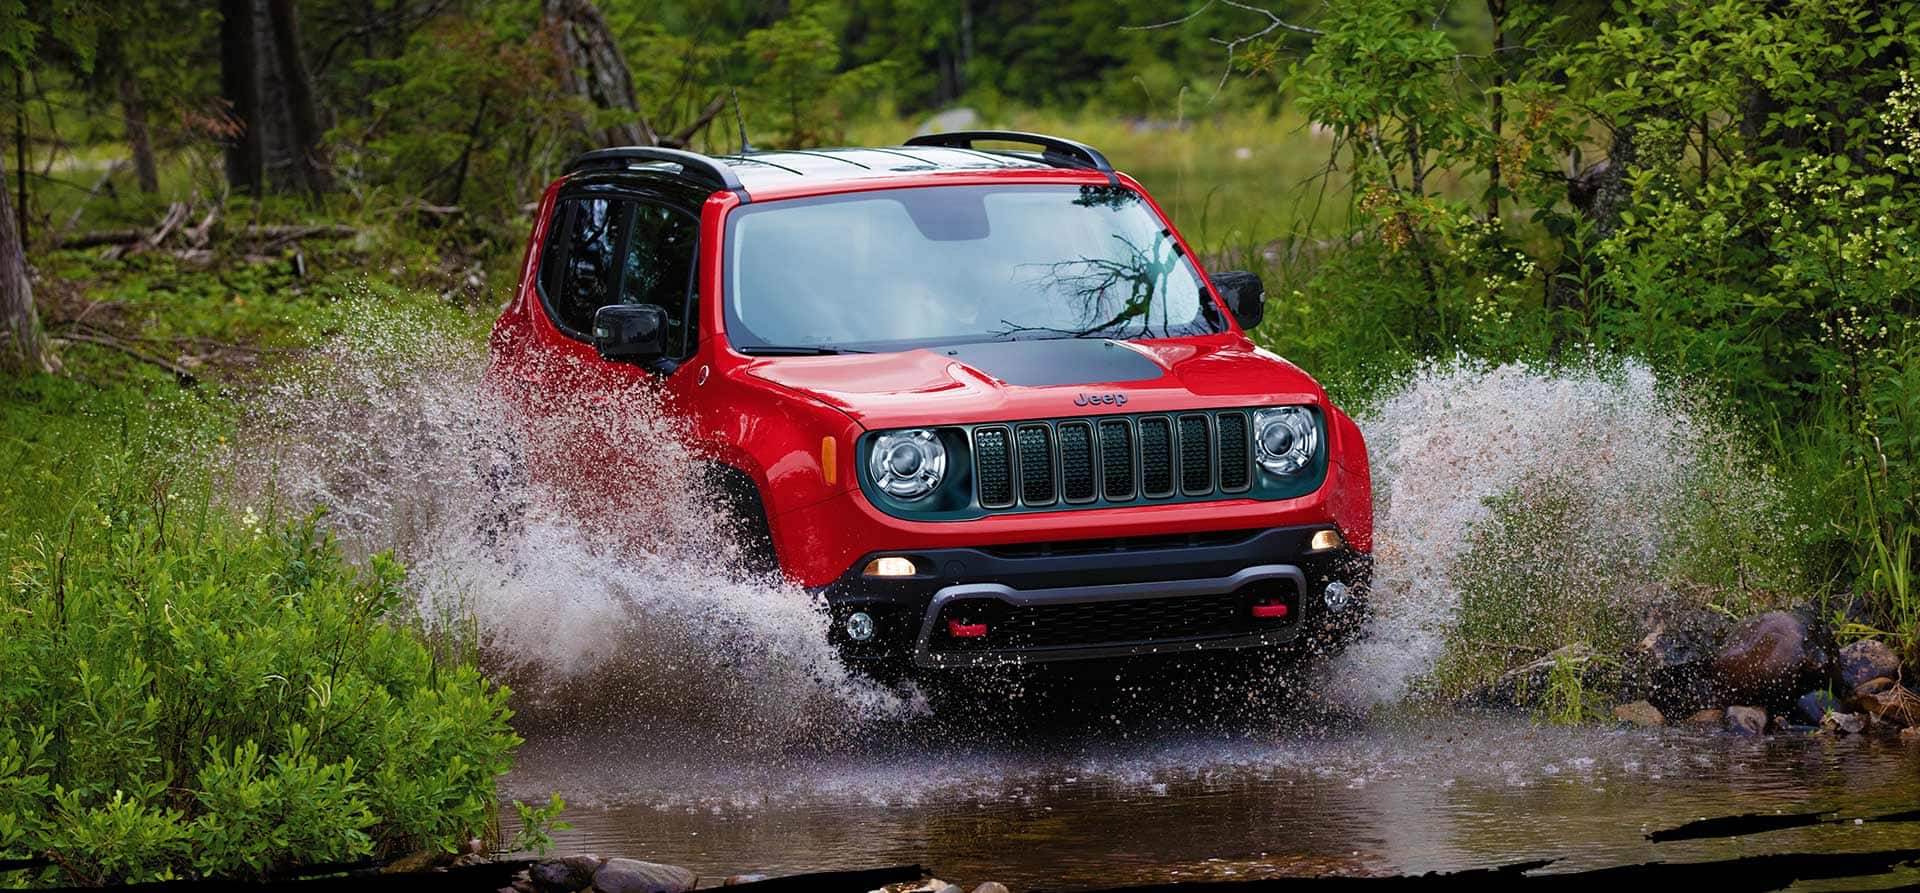 The 2022 Jeep Renegade Trailhawk being driven through a stream, water splashing up over its wheel wells.